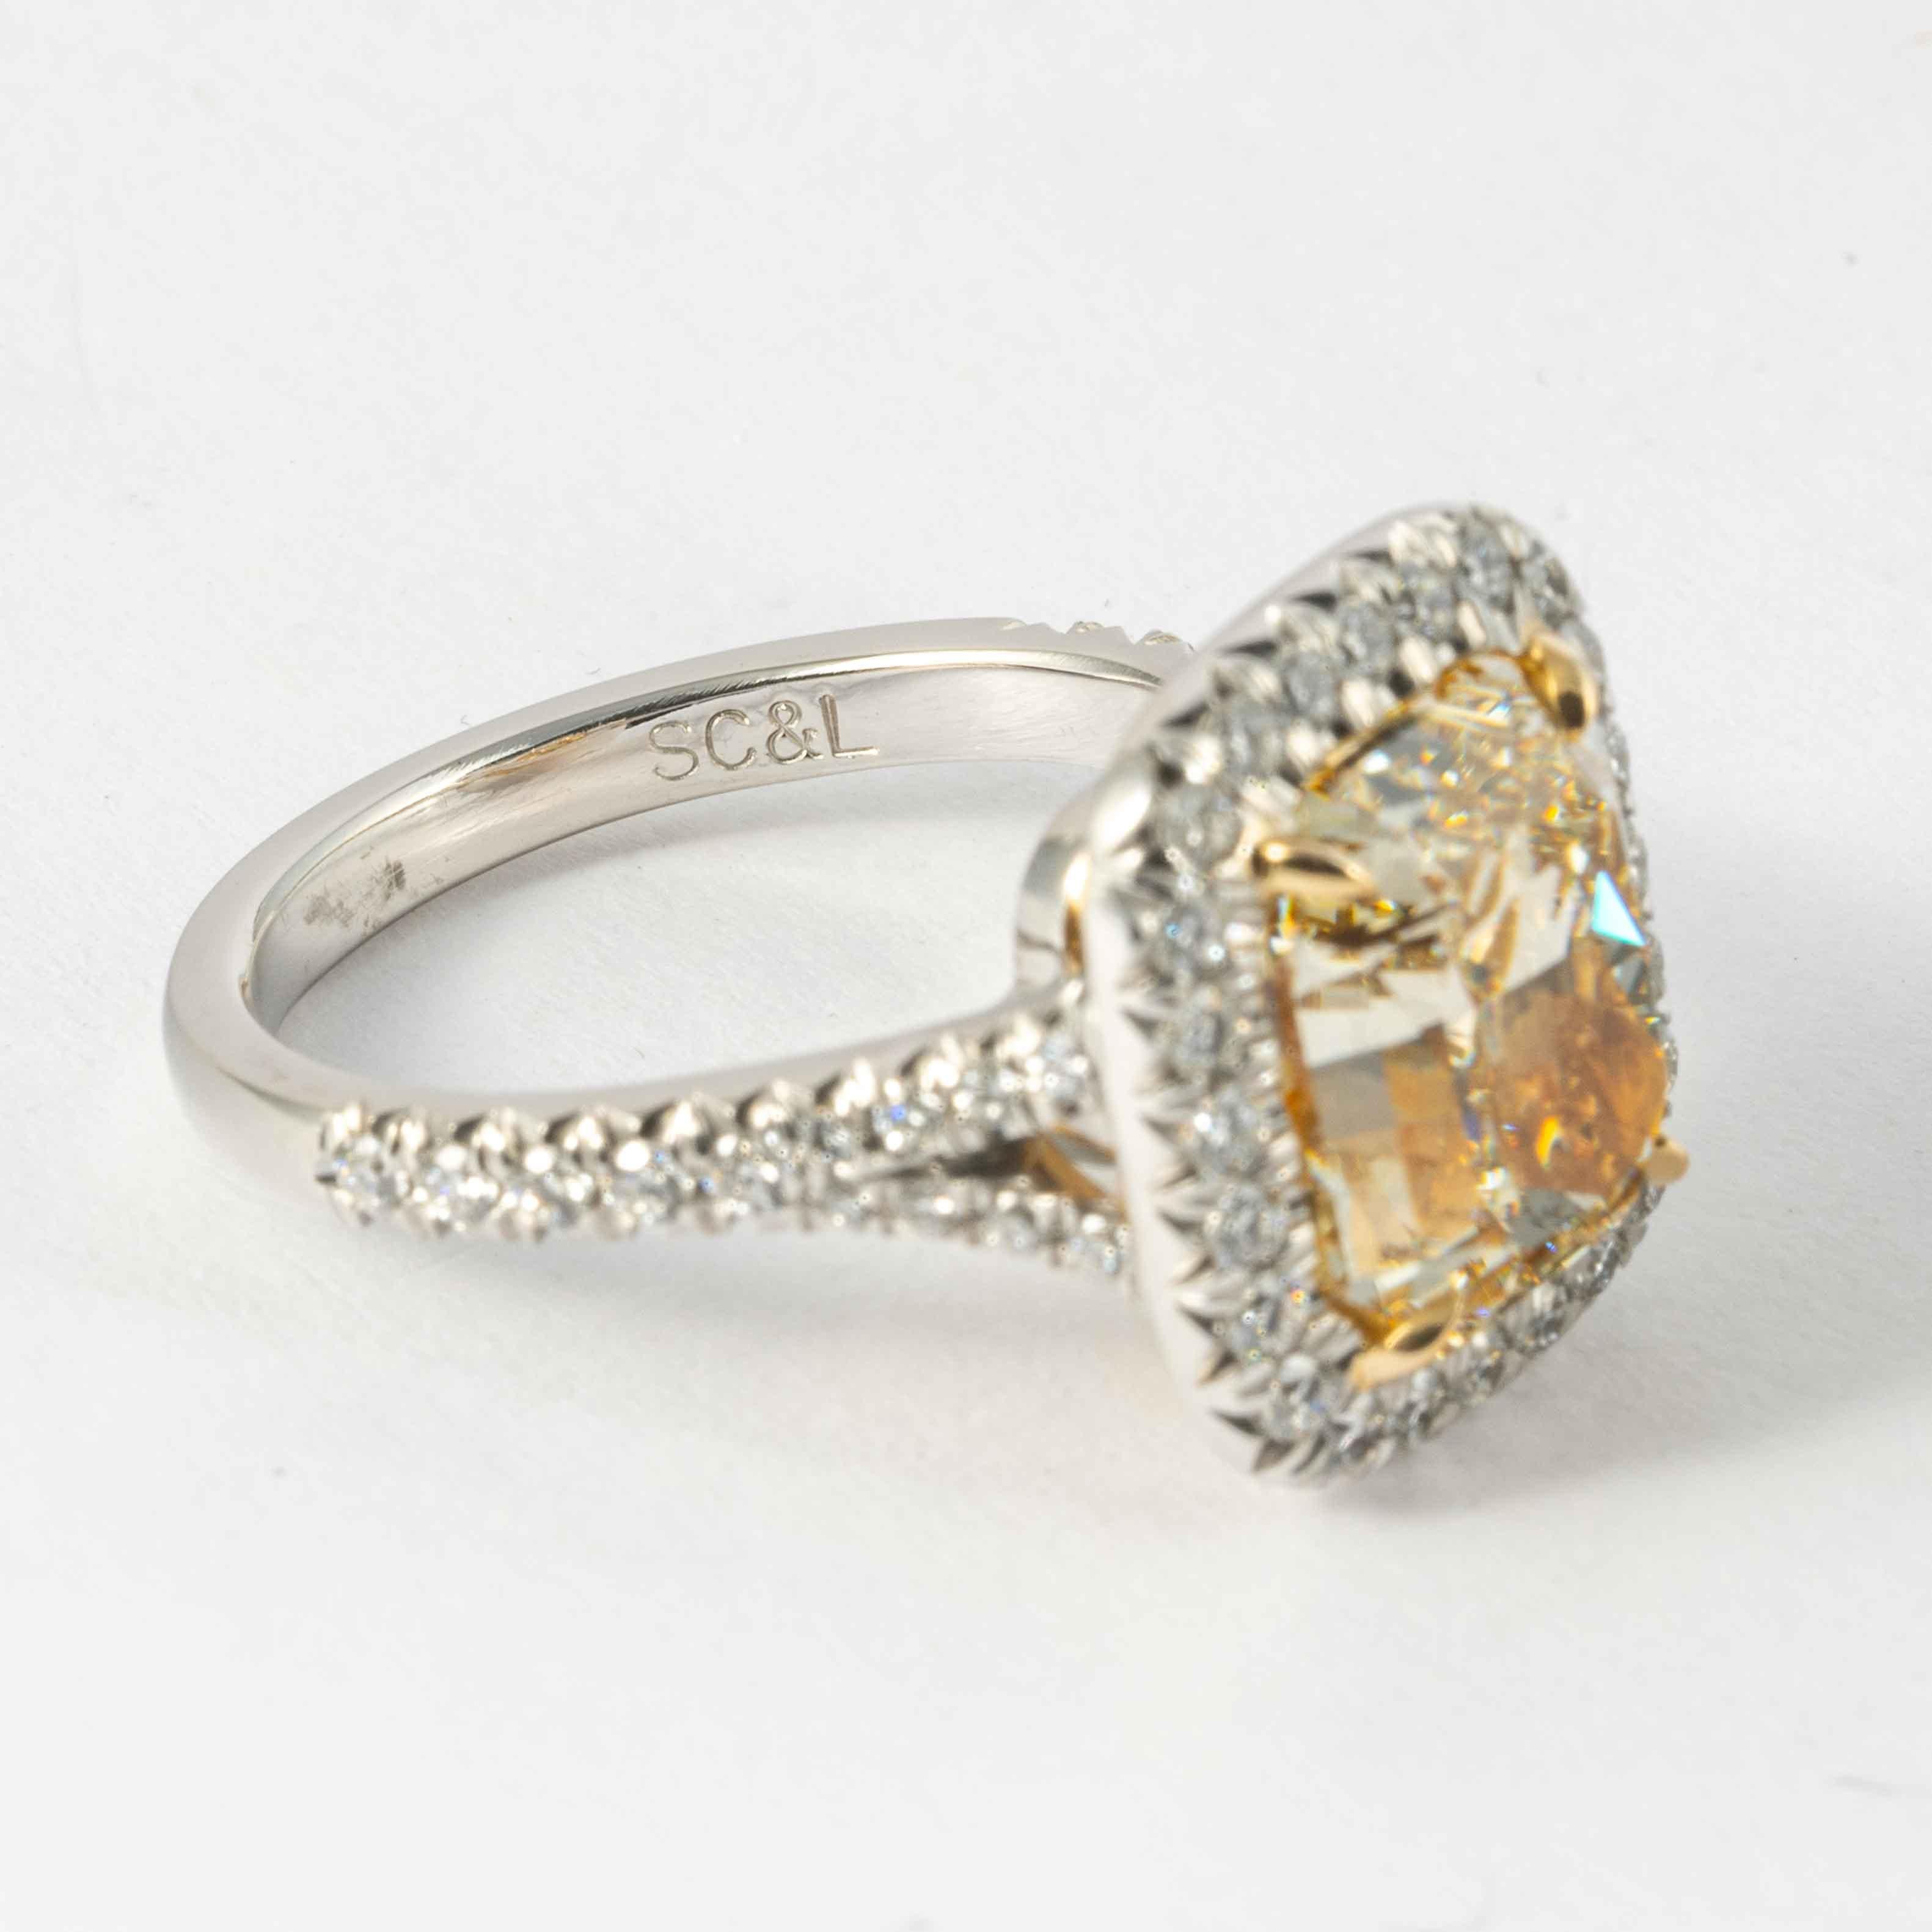 Shreve, Crump & Low GIA Certified 5.27 Carat Fancy Yellow Radiant Cut Plat Ring In New Condition For Sale In Boston, MA